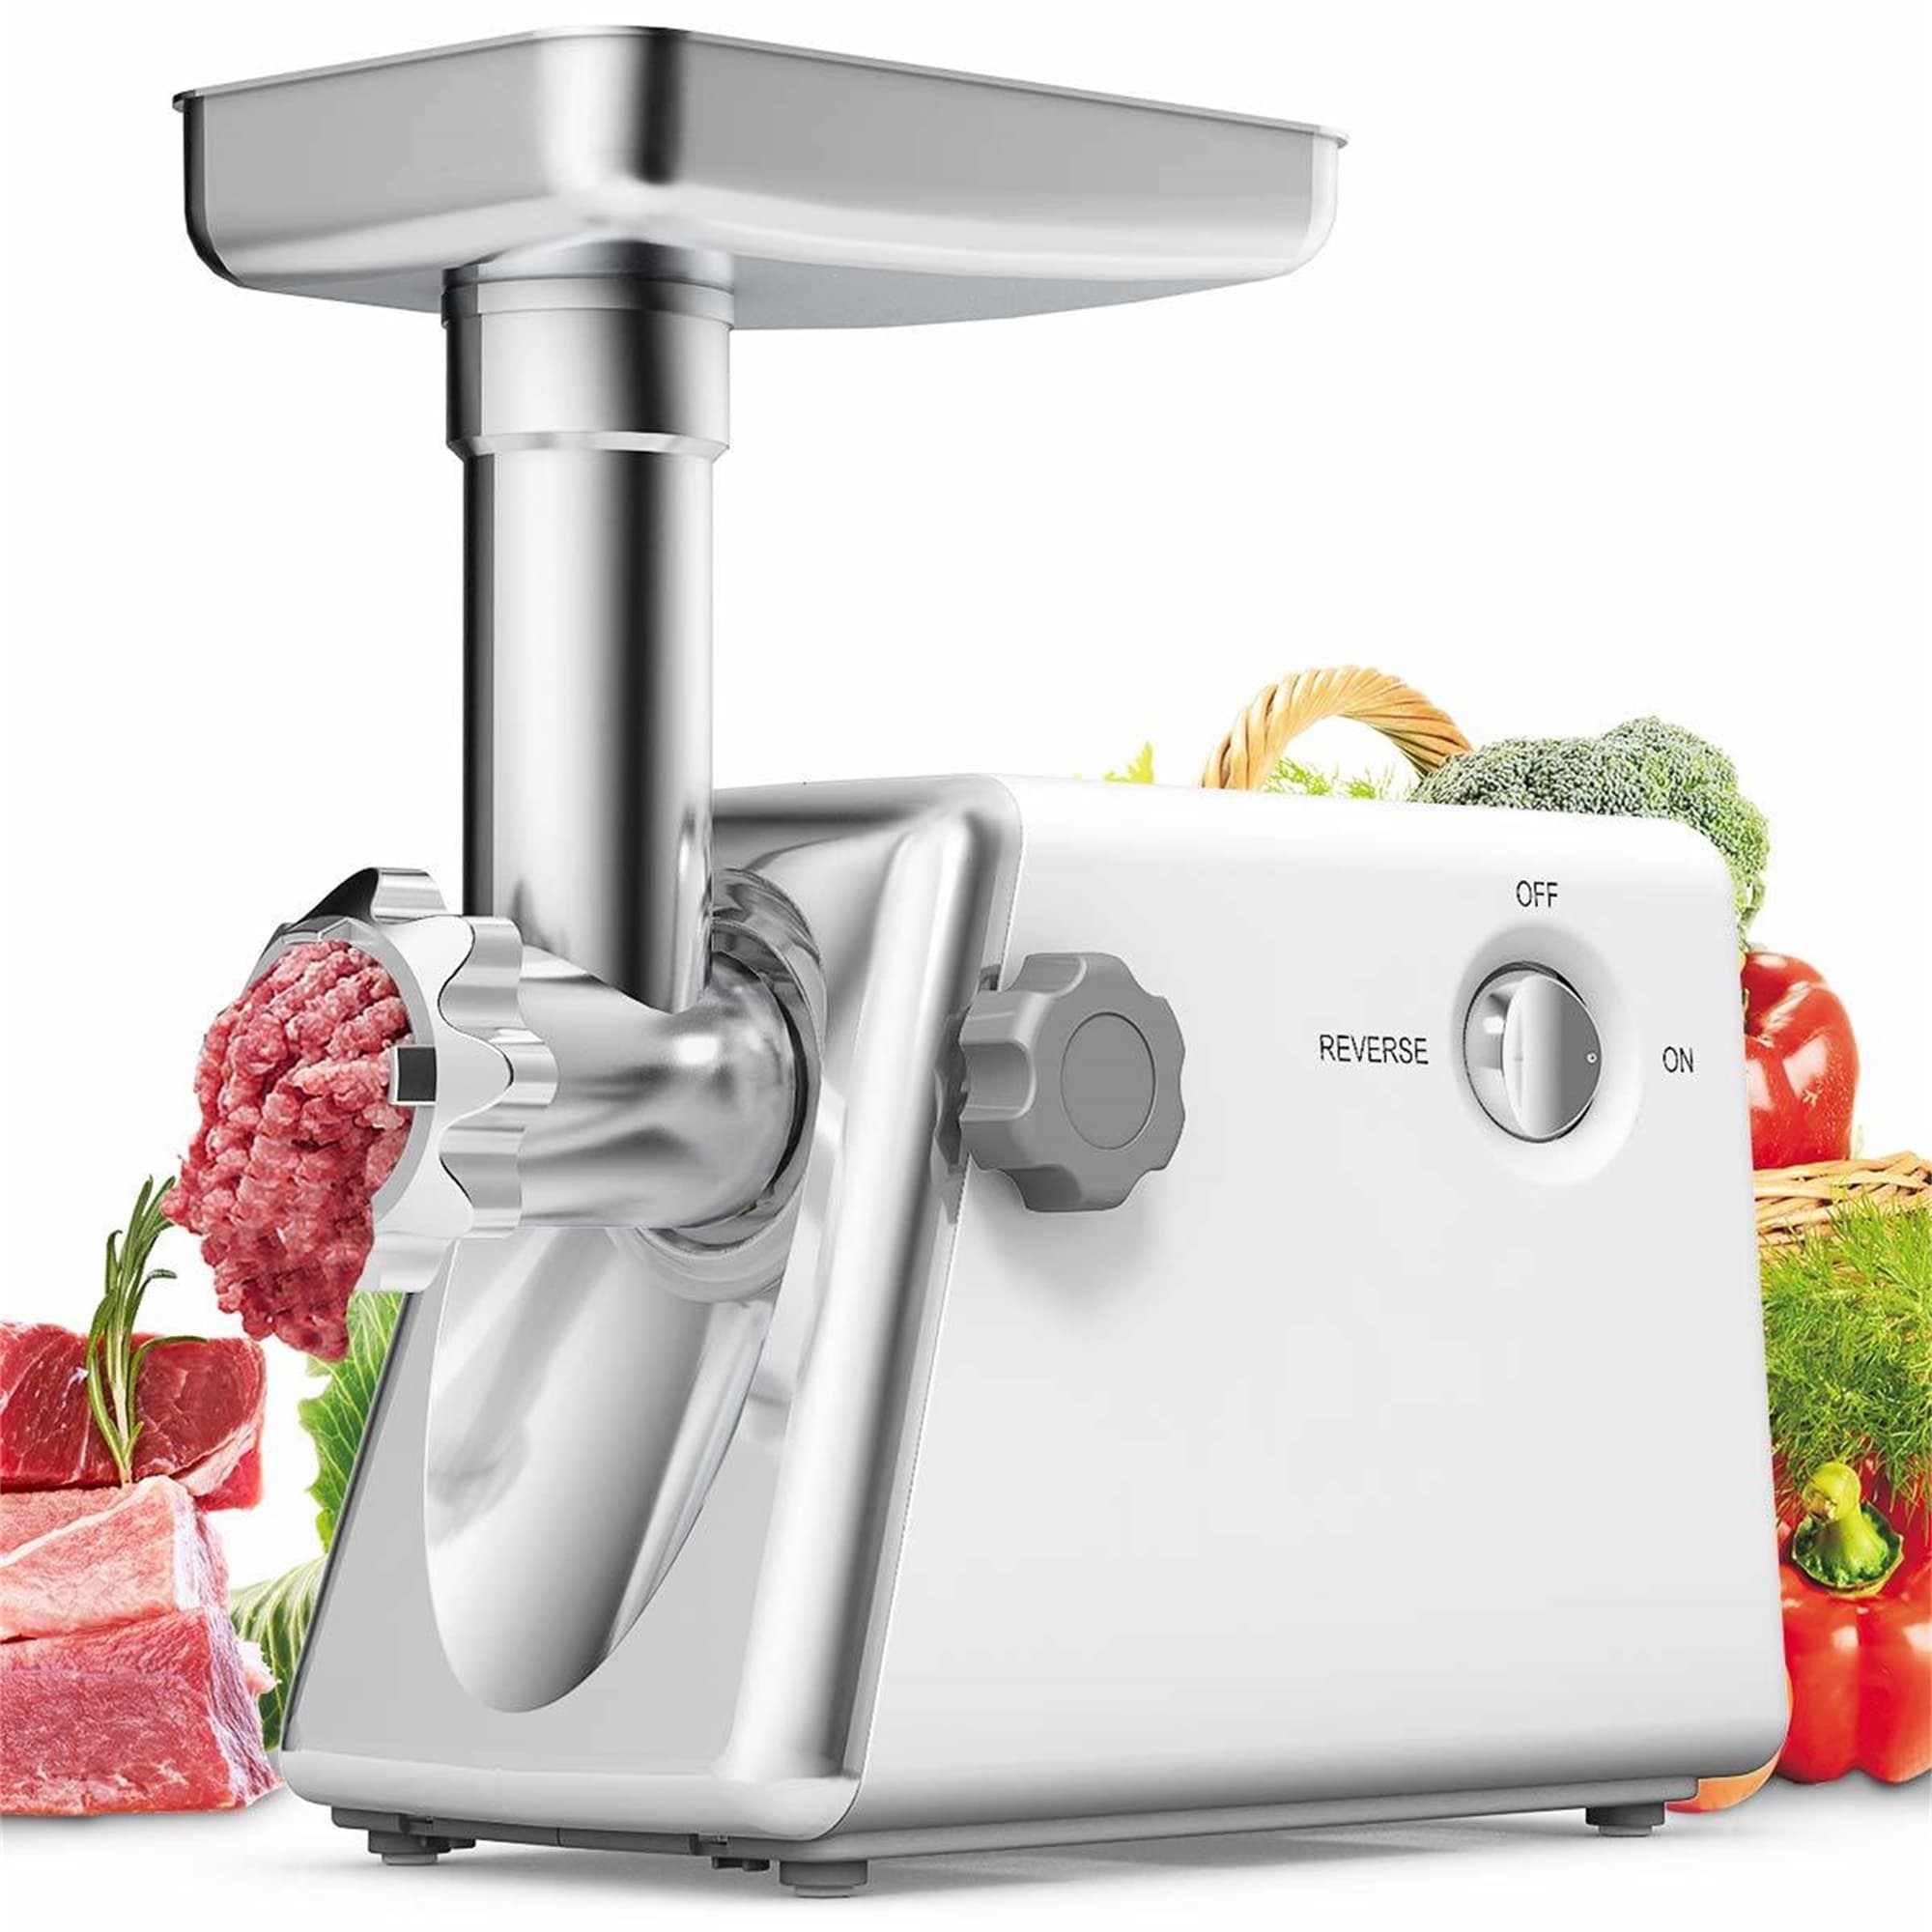 Stainless Steel Electric Meat Grinder, Sausage Stuffer Kit for